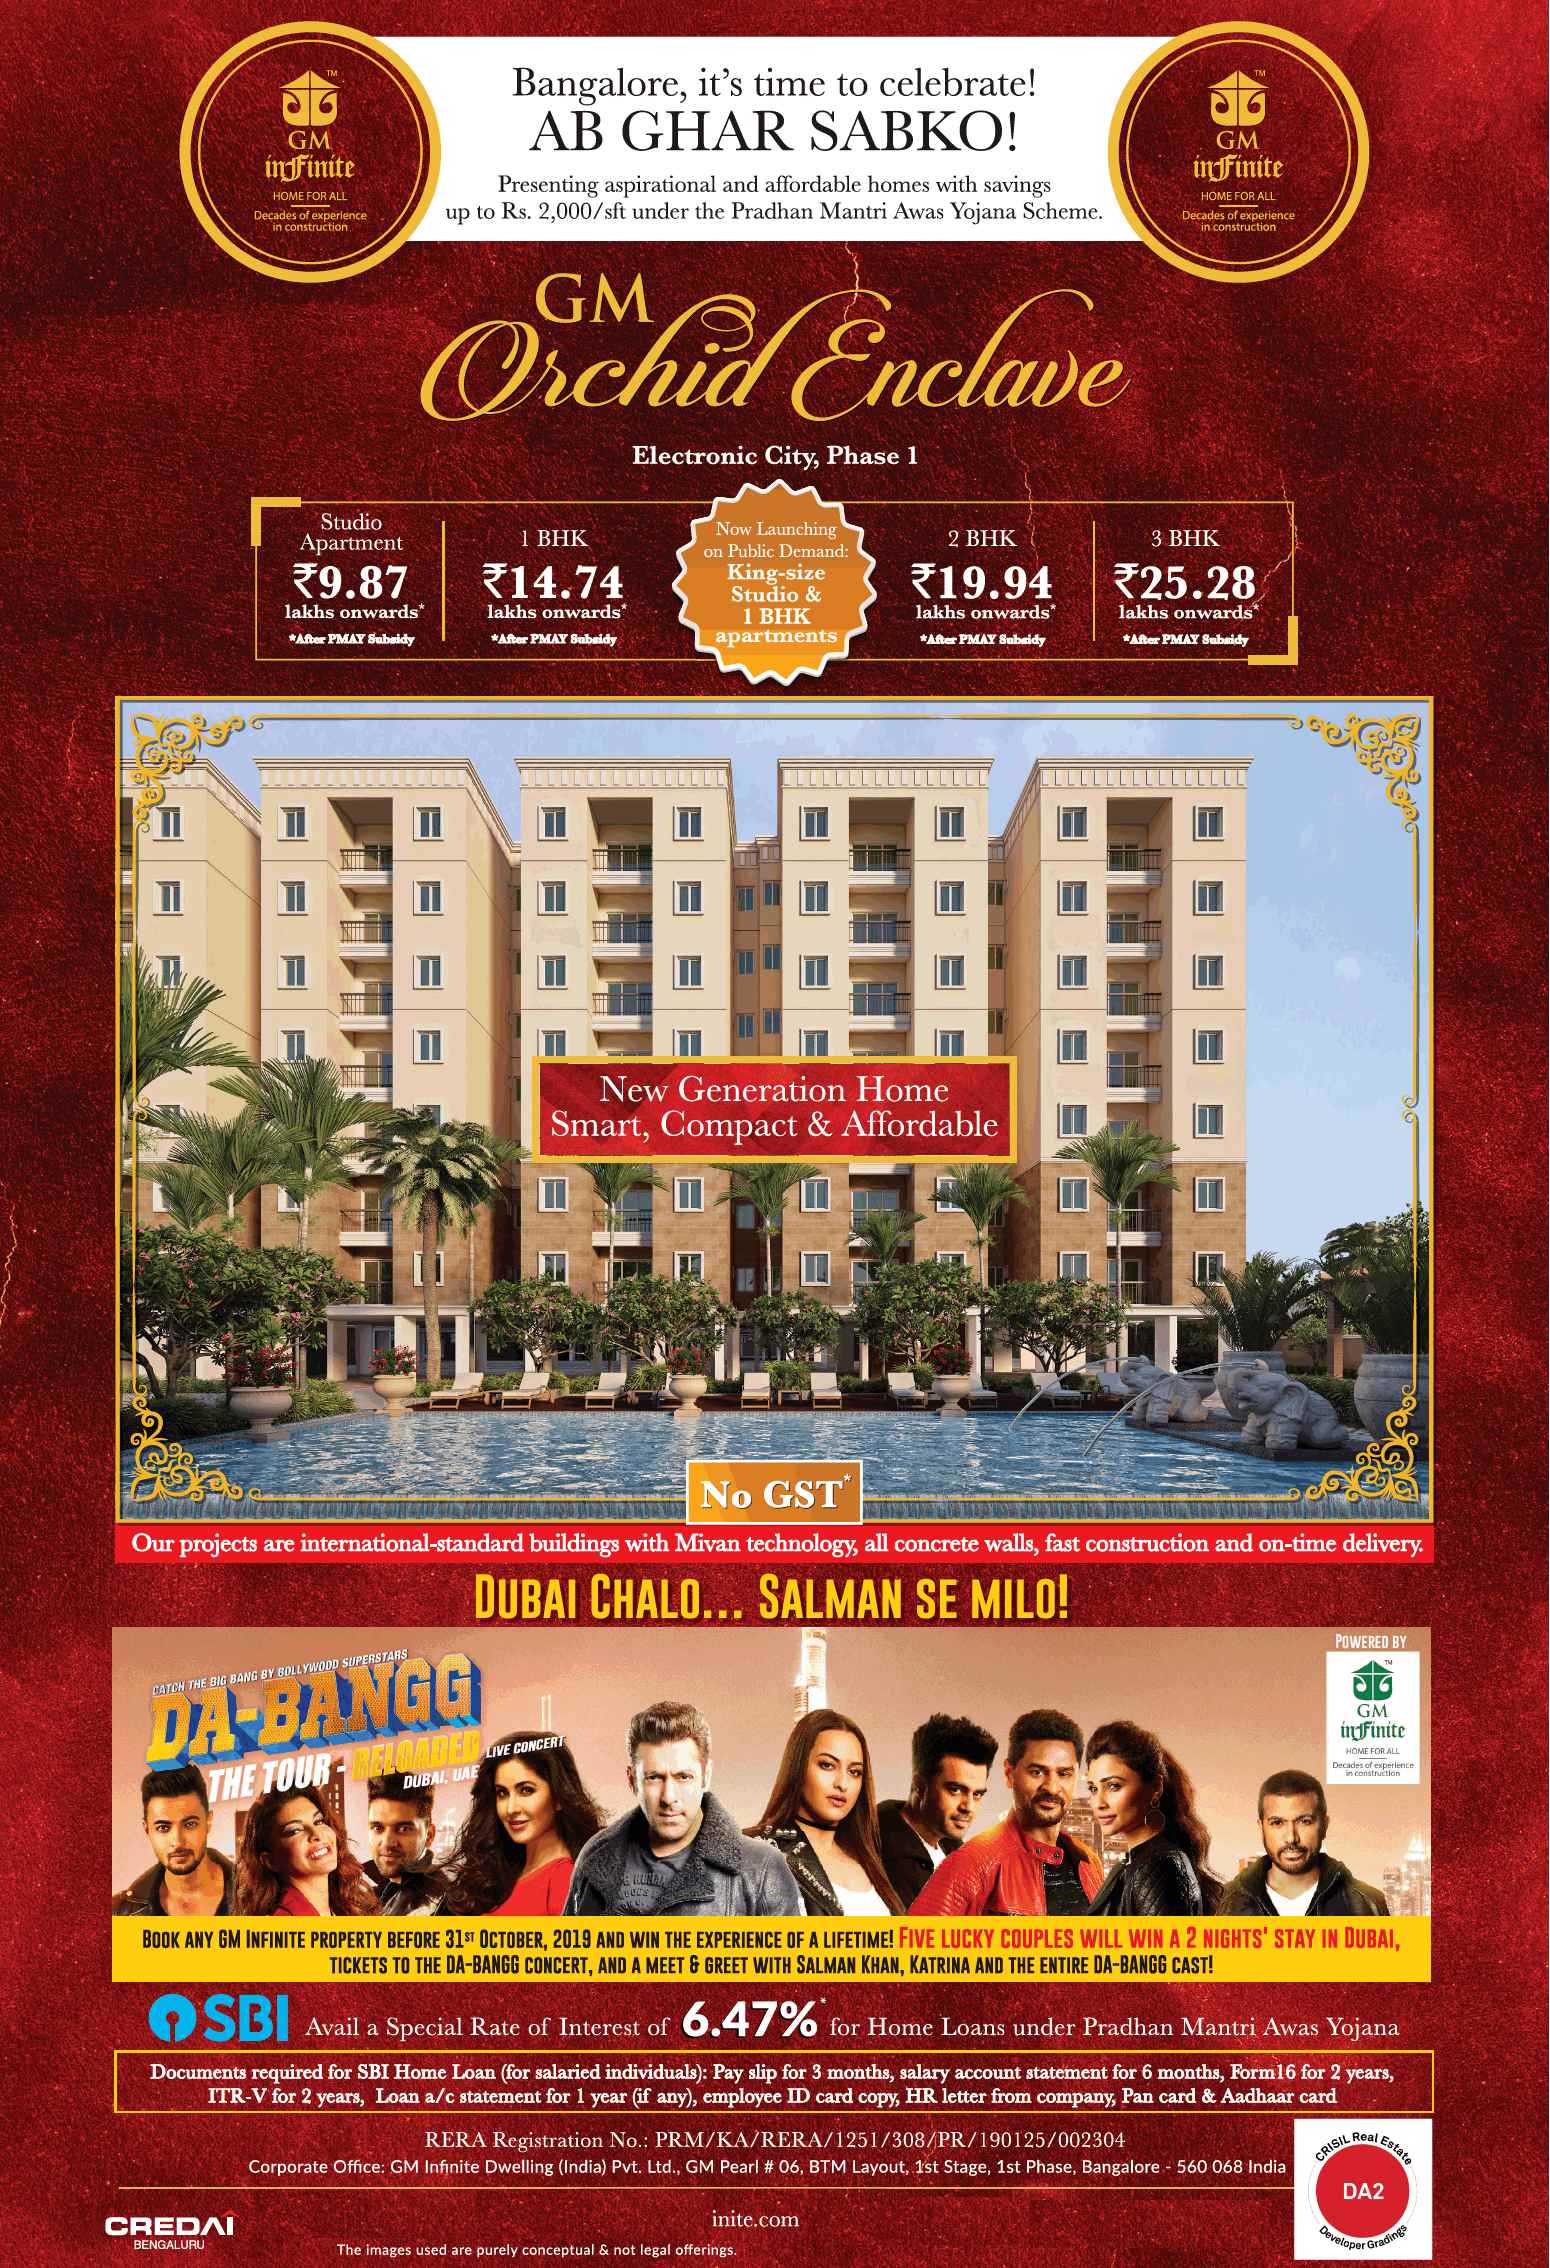 Now launching King-size studio & 1 BHK apartments  at GM Orchid Enclave, Bangalore Update